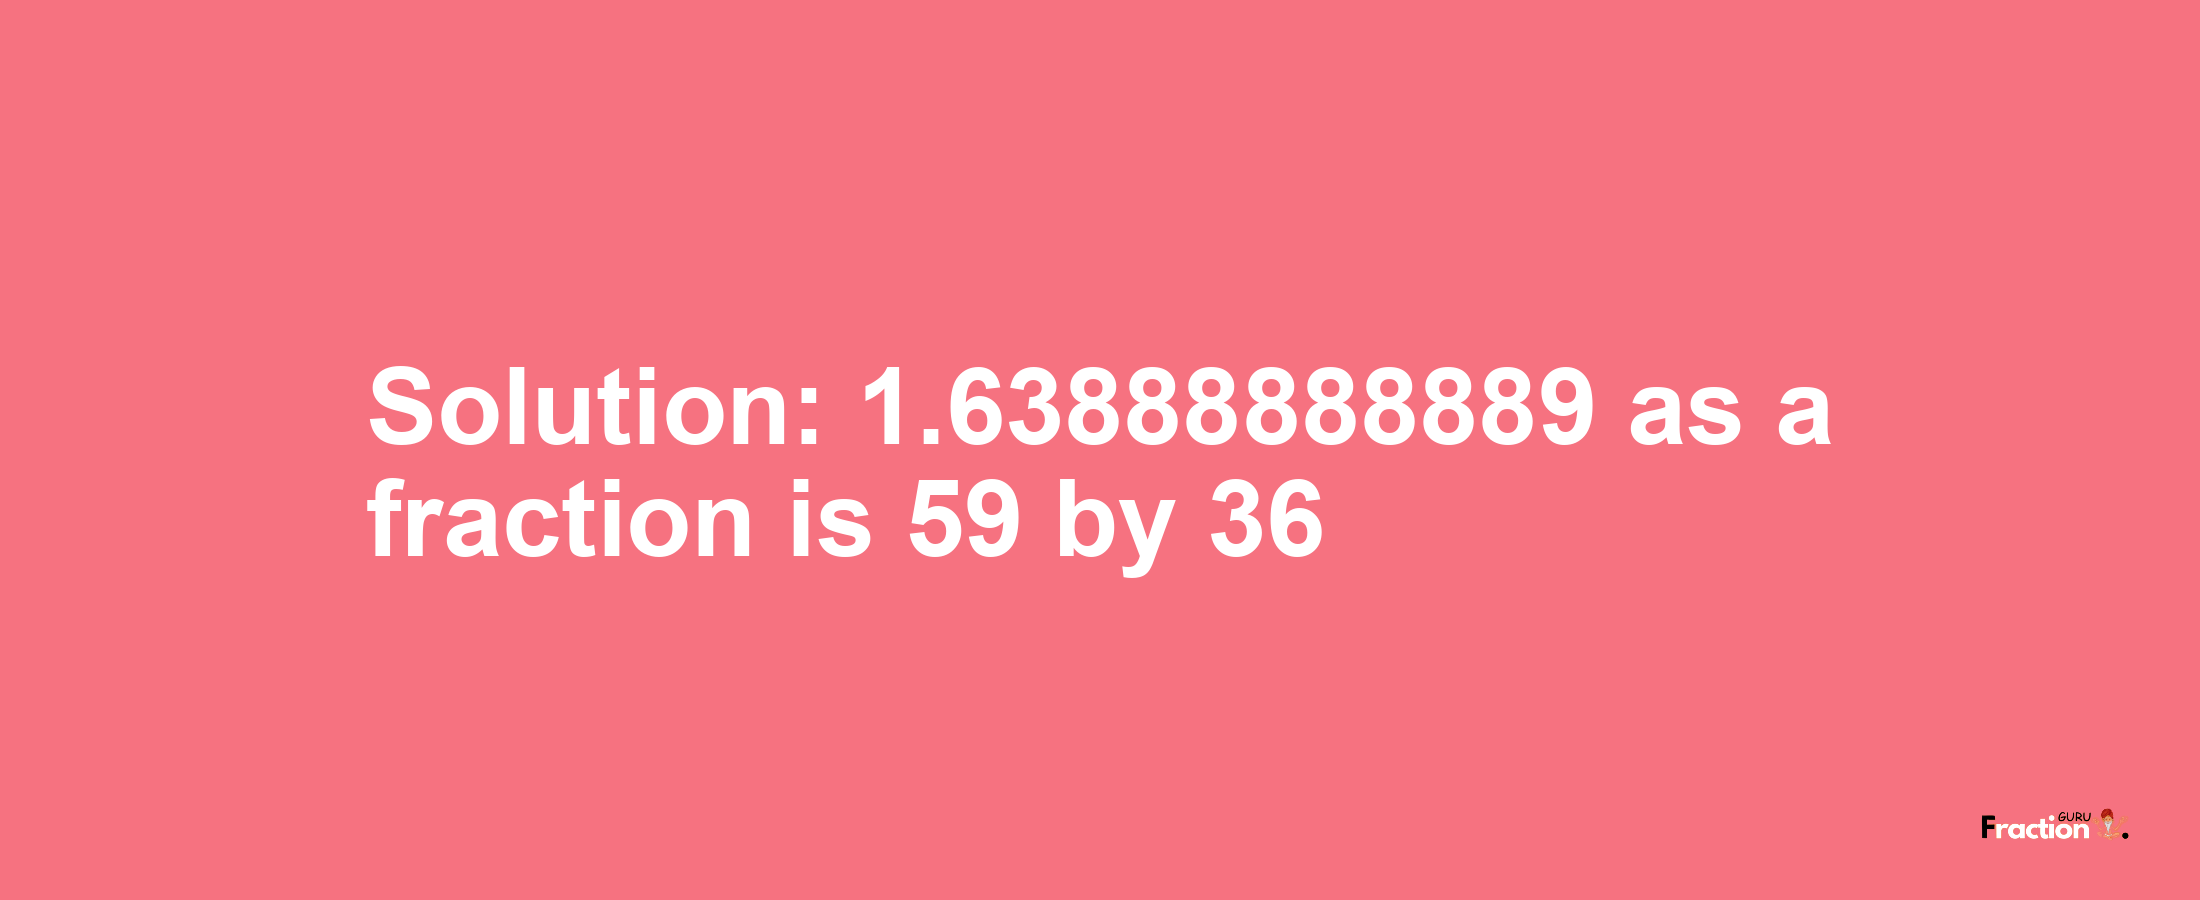 Solution:1.63888888889 as a fraction is 59/36